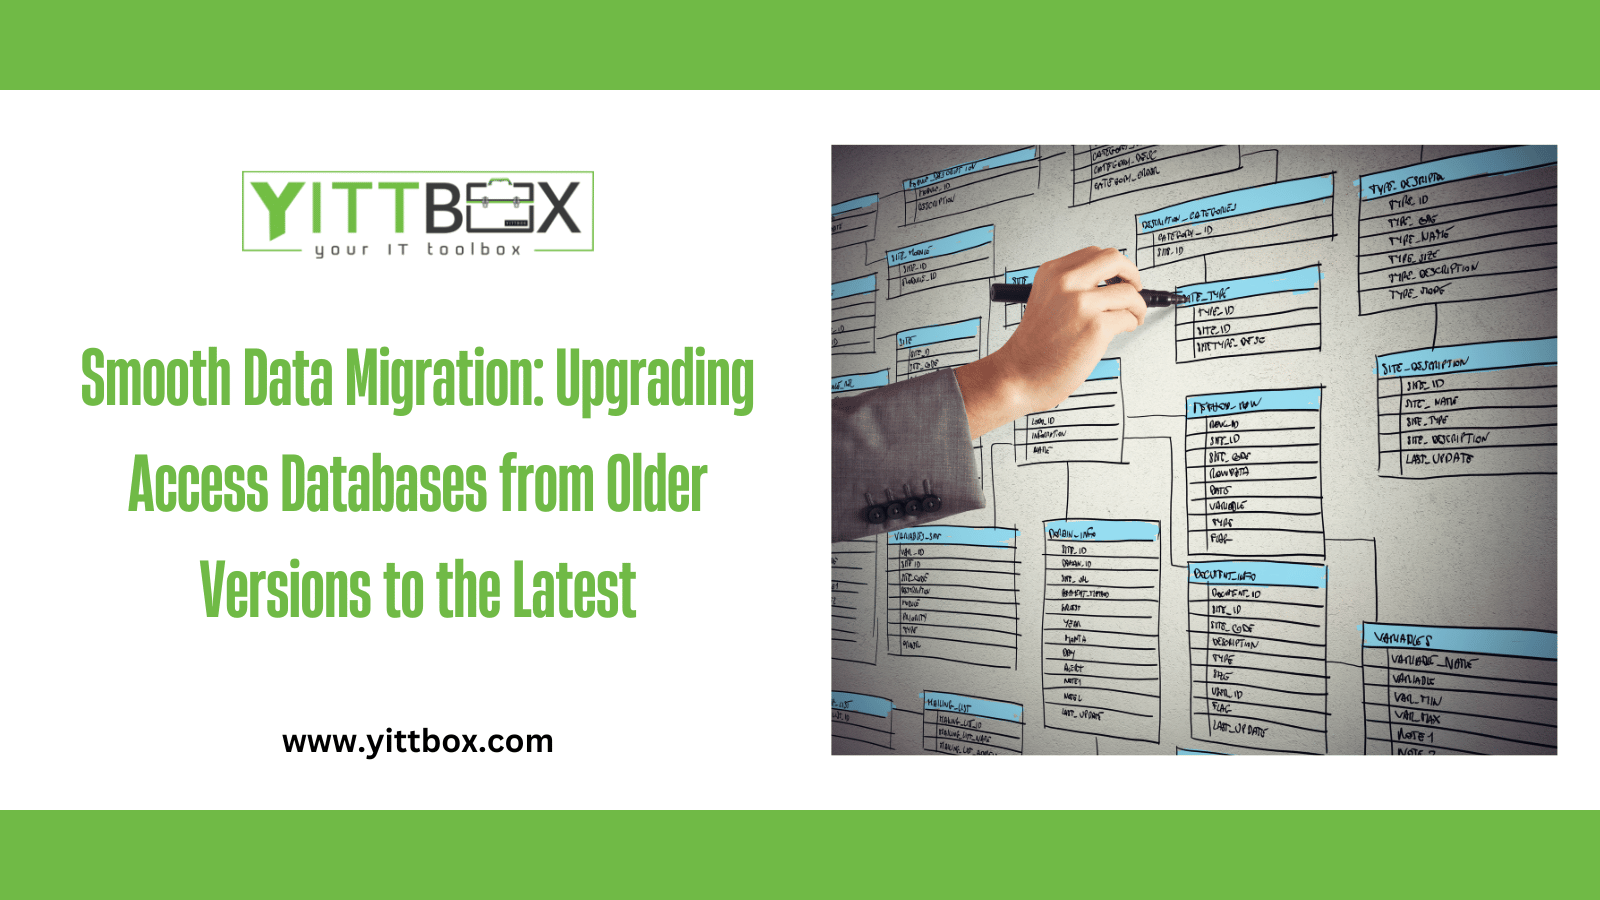 Smooth Data Migration: Upgrading Access Databases from Older Versions to the Latest